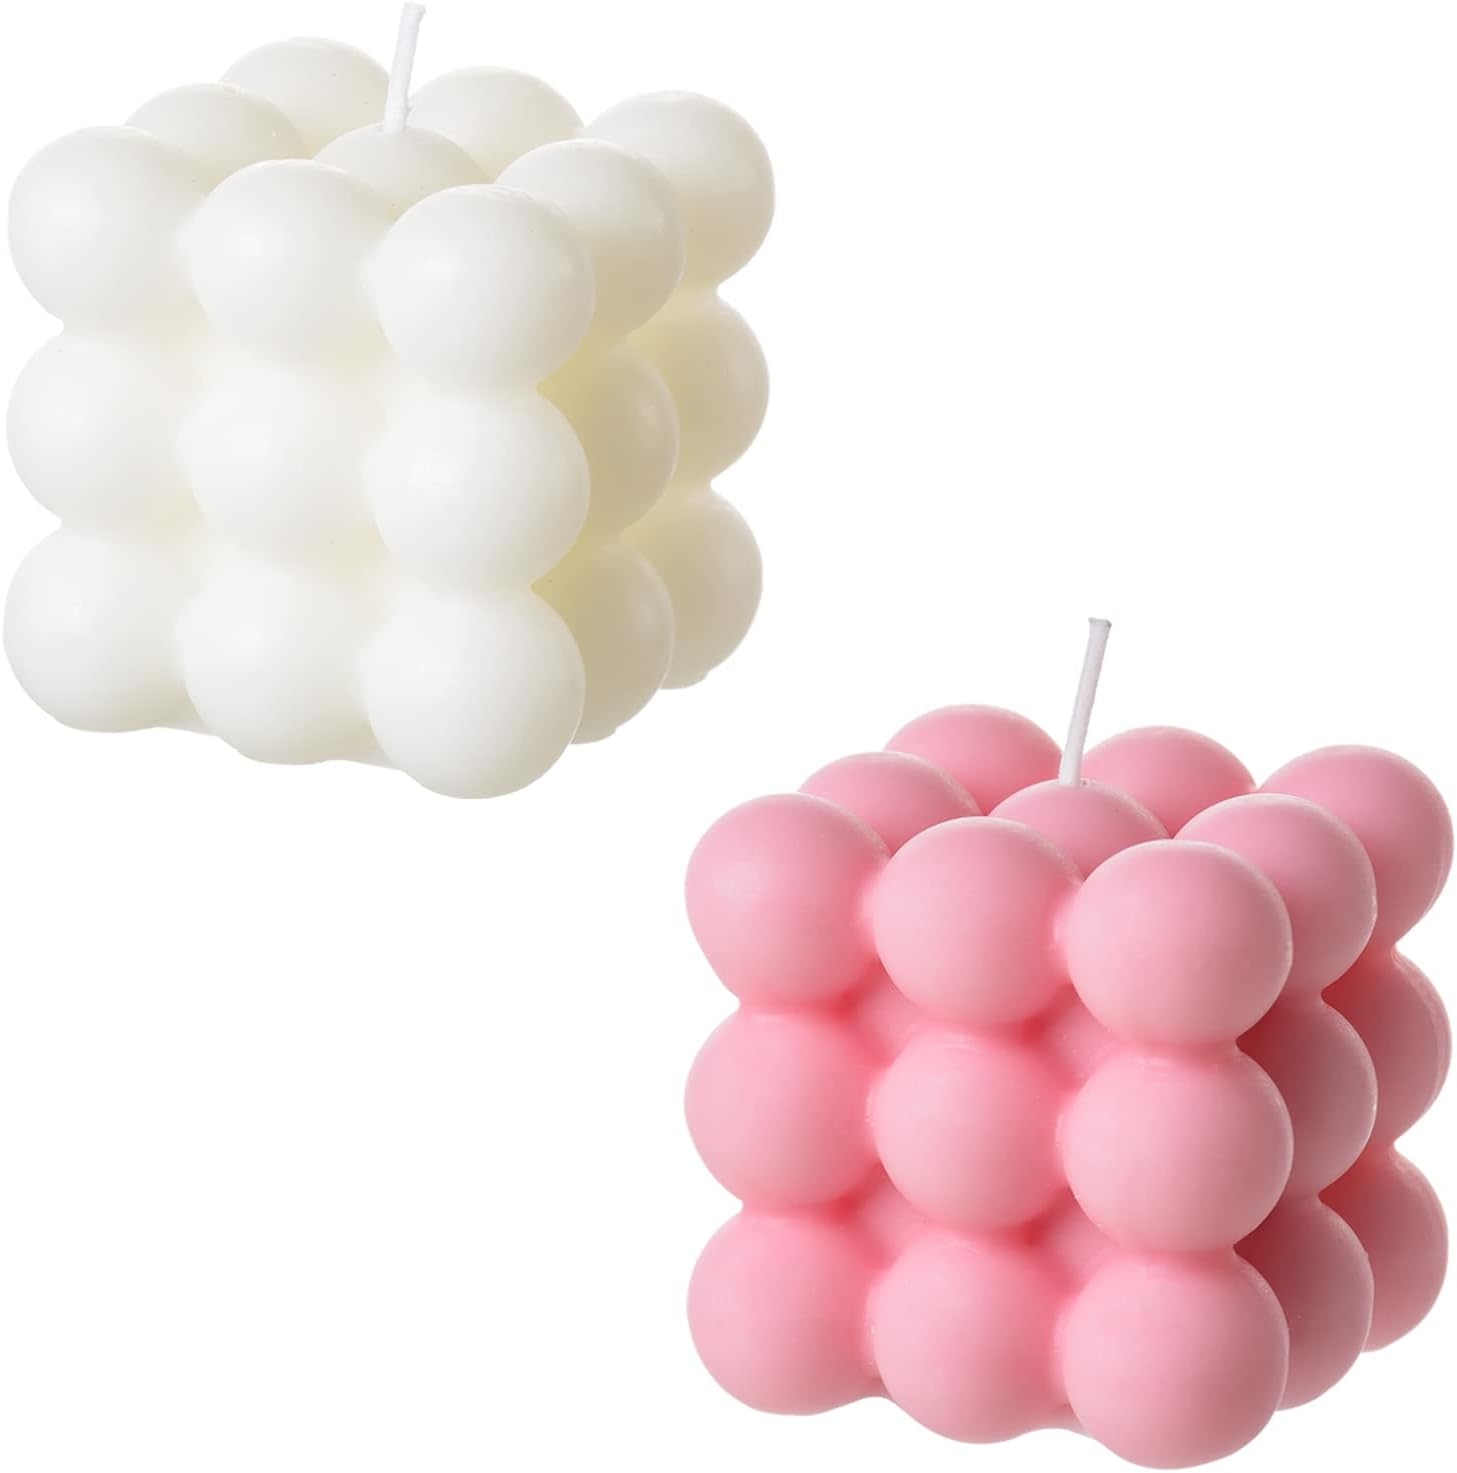 Bubble Candle – Cube Soy Wax Candles, Home Decor Candle, Scented Candle Set 2 Pieces, Home Use and Gifting   price checker  